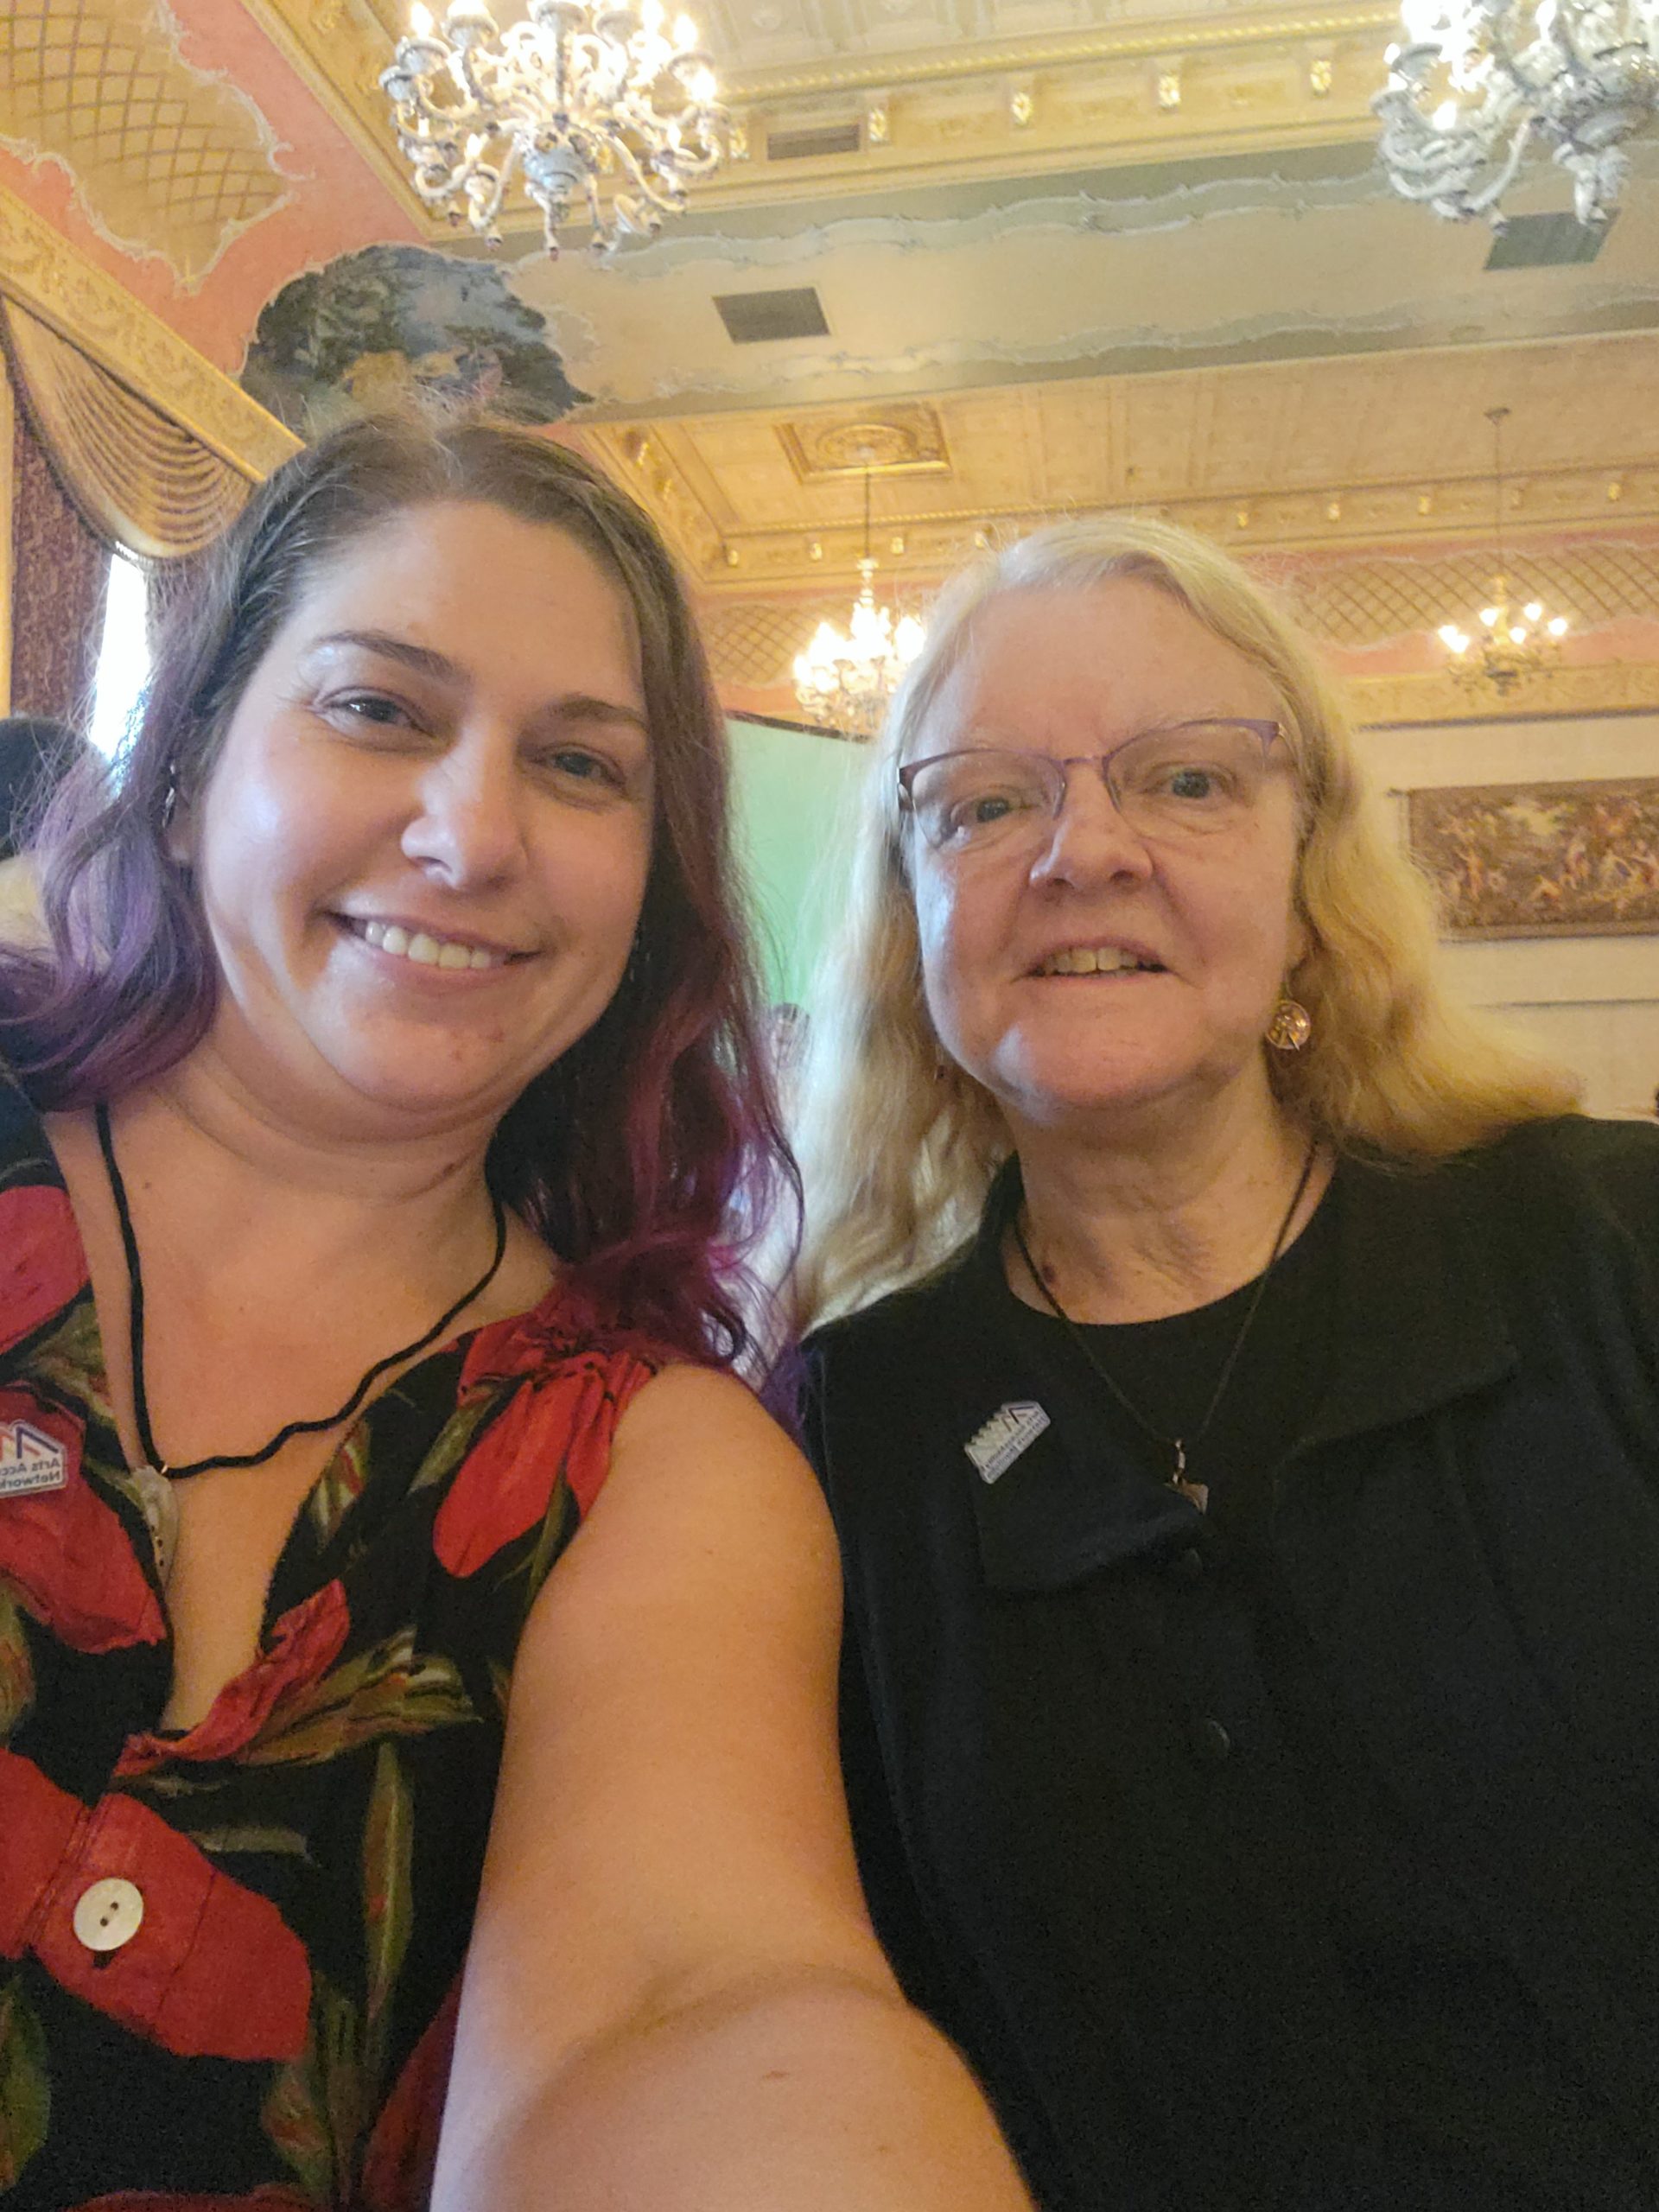 Photograph of Jenel Shaw and Diane Driedger. Jenel is a white woman in her 30s with long brown and purple hair. She is wearing a black dress with red flowers. Diane is a white woman in her 50s with long blond hair and purple rimmed glasses. She is wearing black sweater over a black shirt. They are both smiling at the camera. In the background you can see chandeliers and a goldish ceiling.